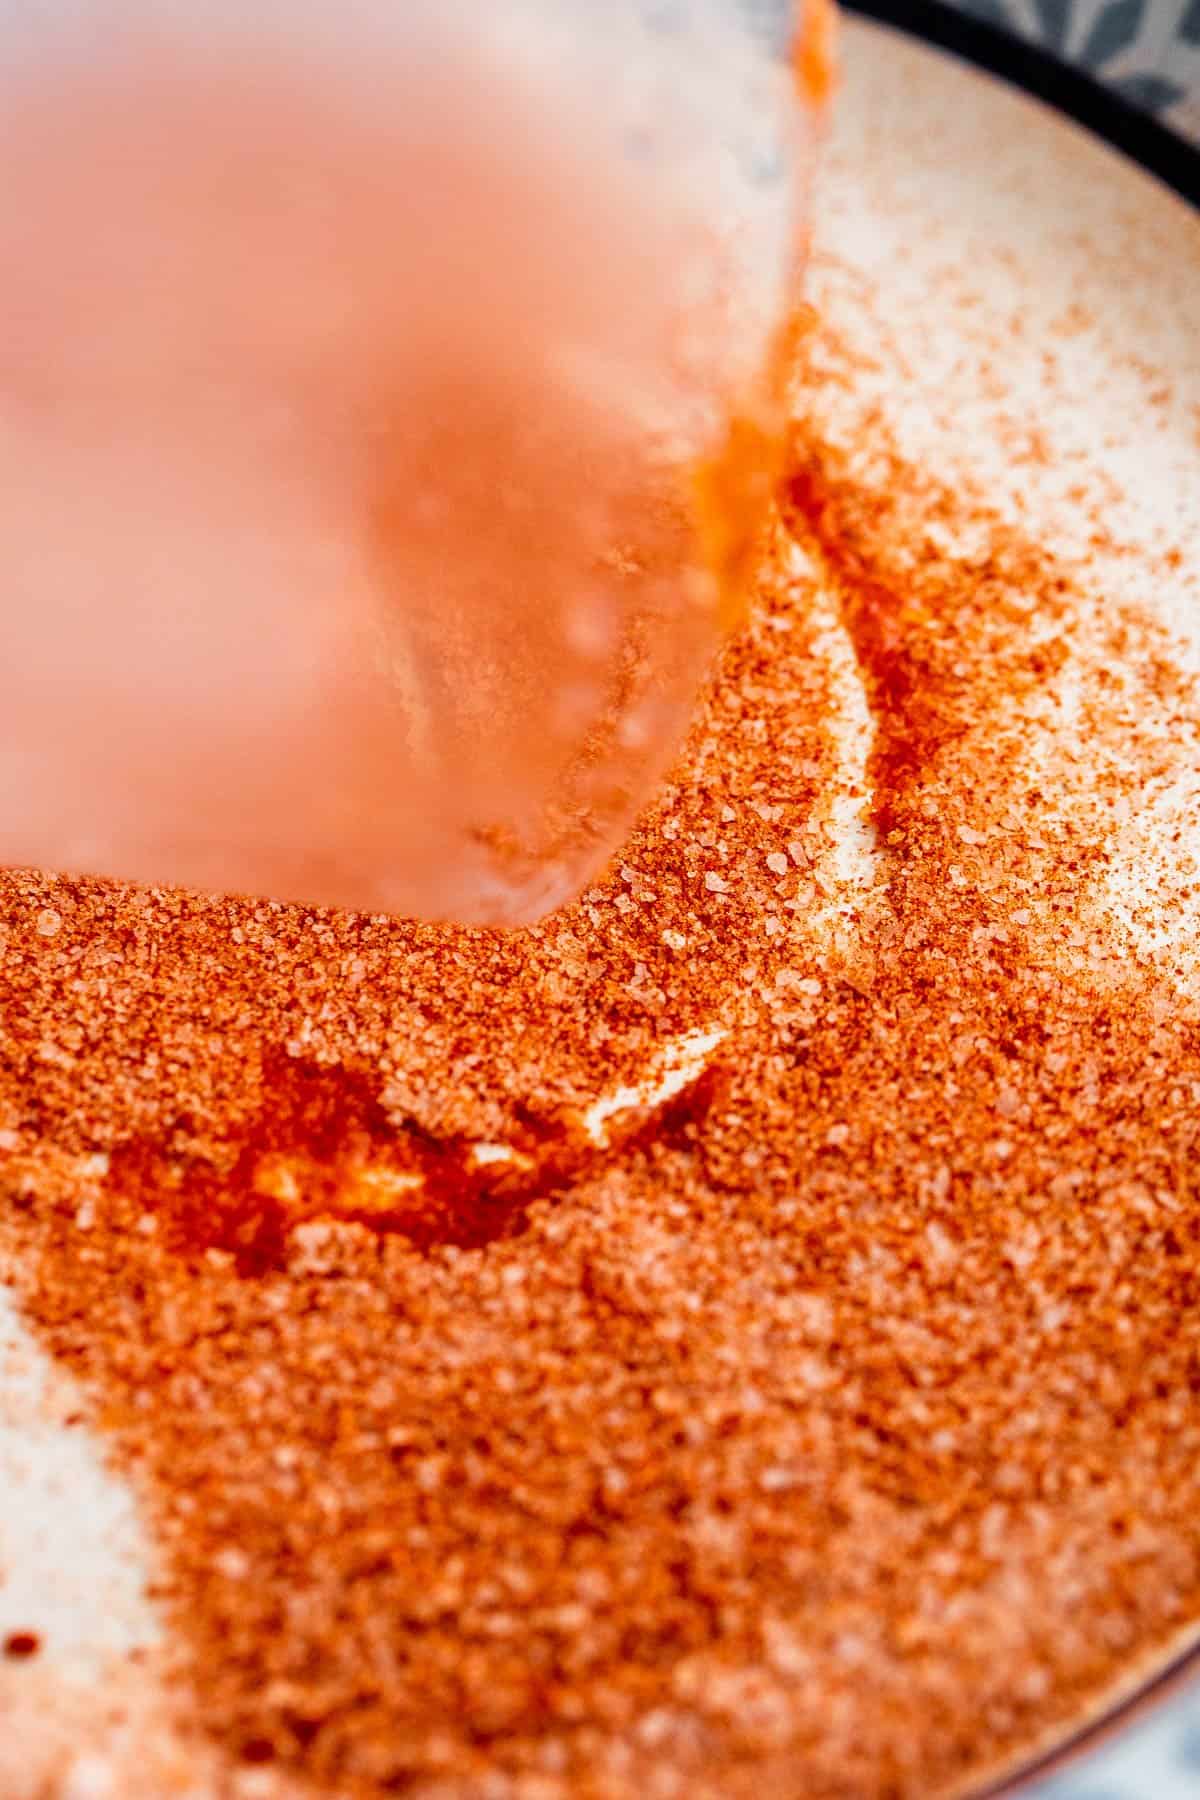 kosher salt and chili powder mixed for rimming cocktail glasses